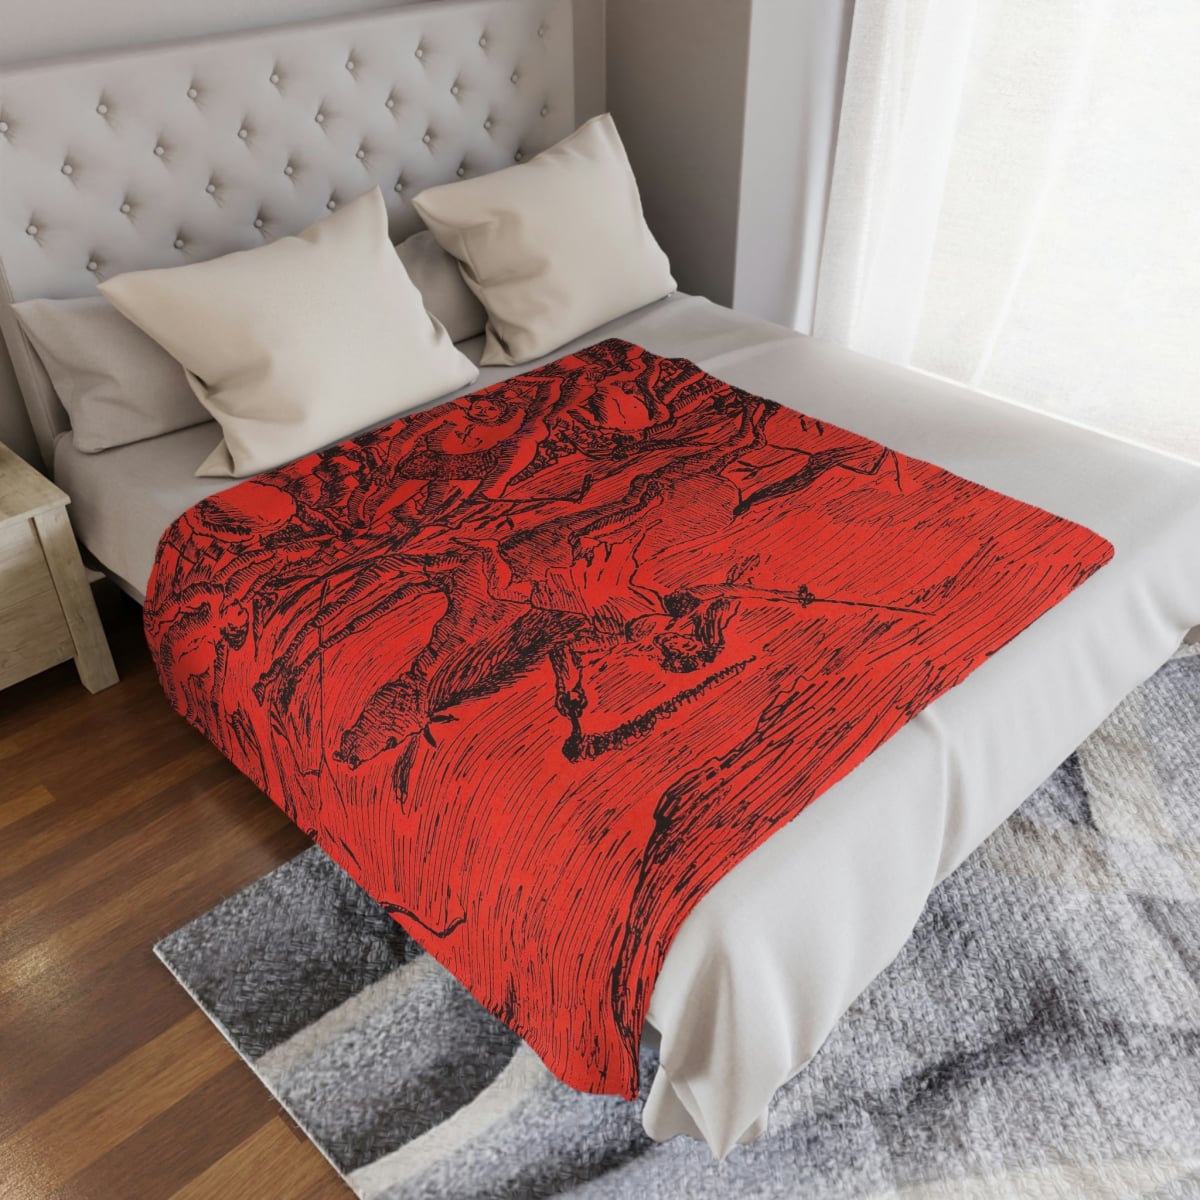 Luxurious Blanket with Iconic Artwork